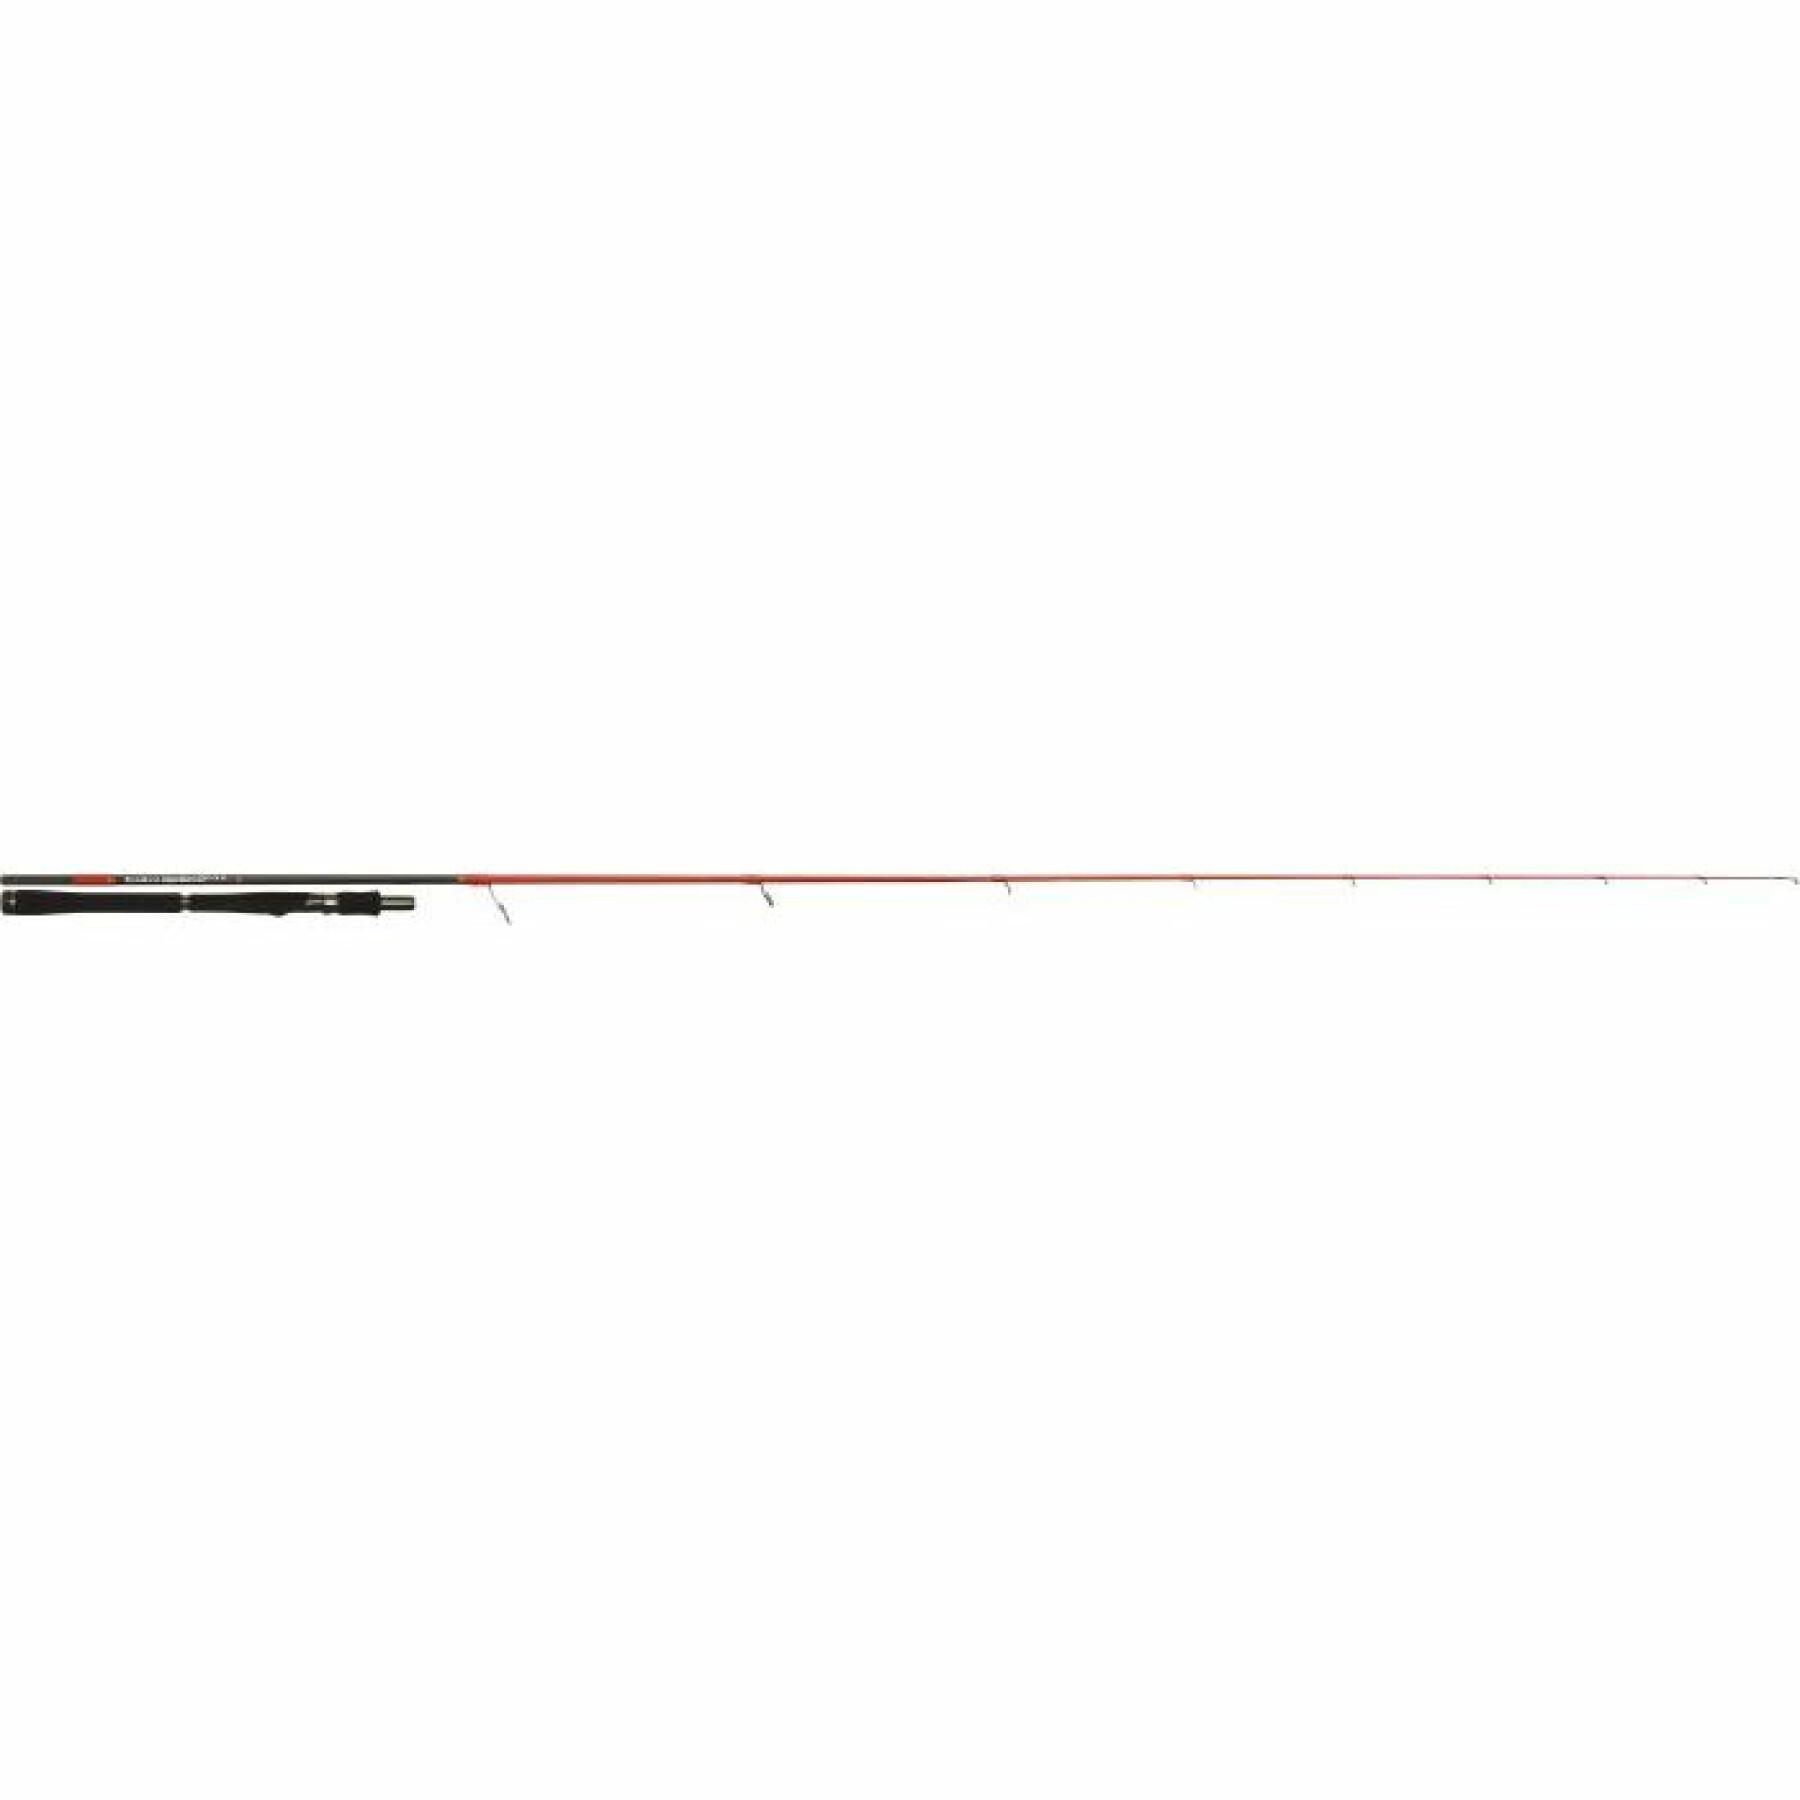 Spinning rod Tenryu Injection SP 76M 5-25g